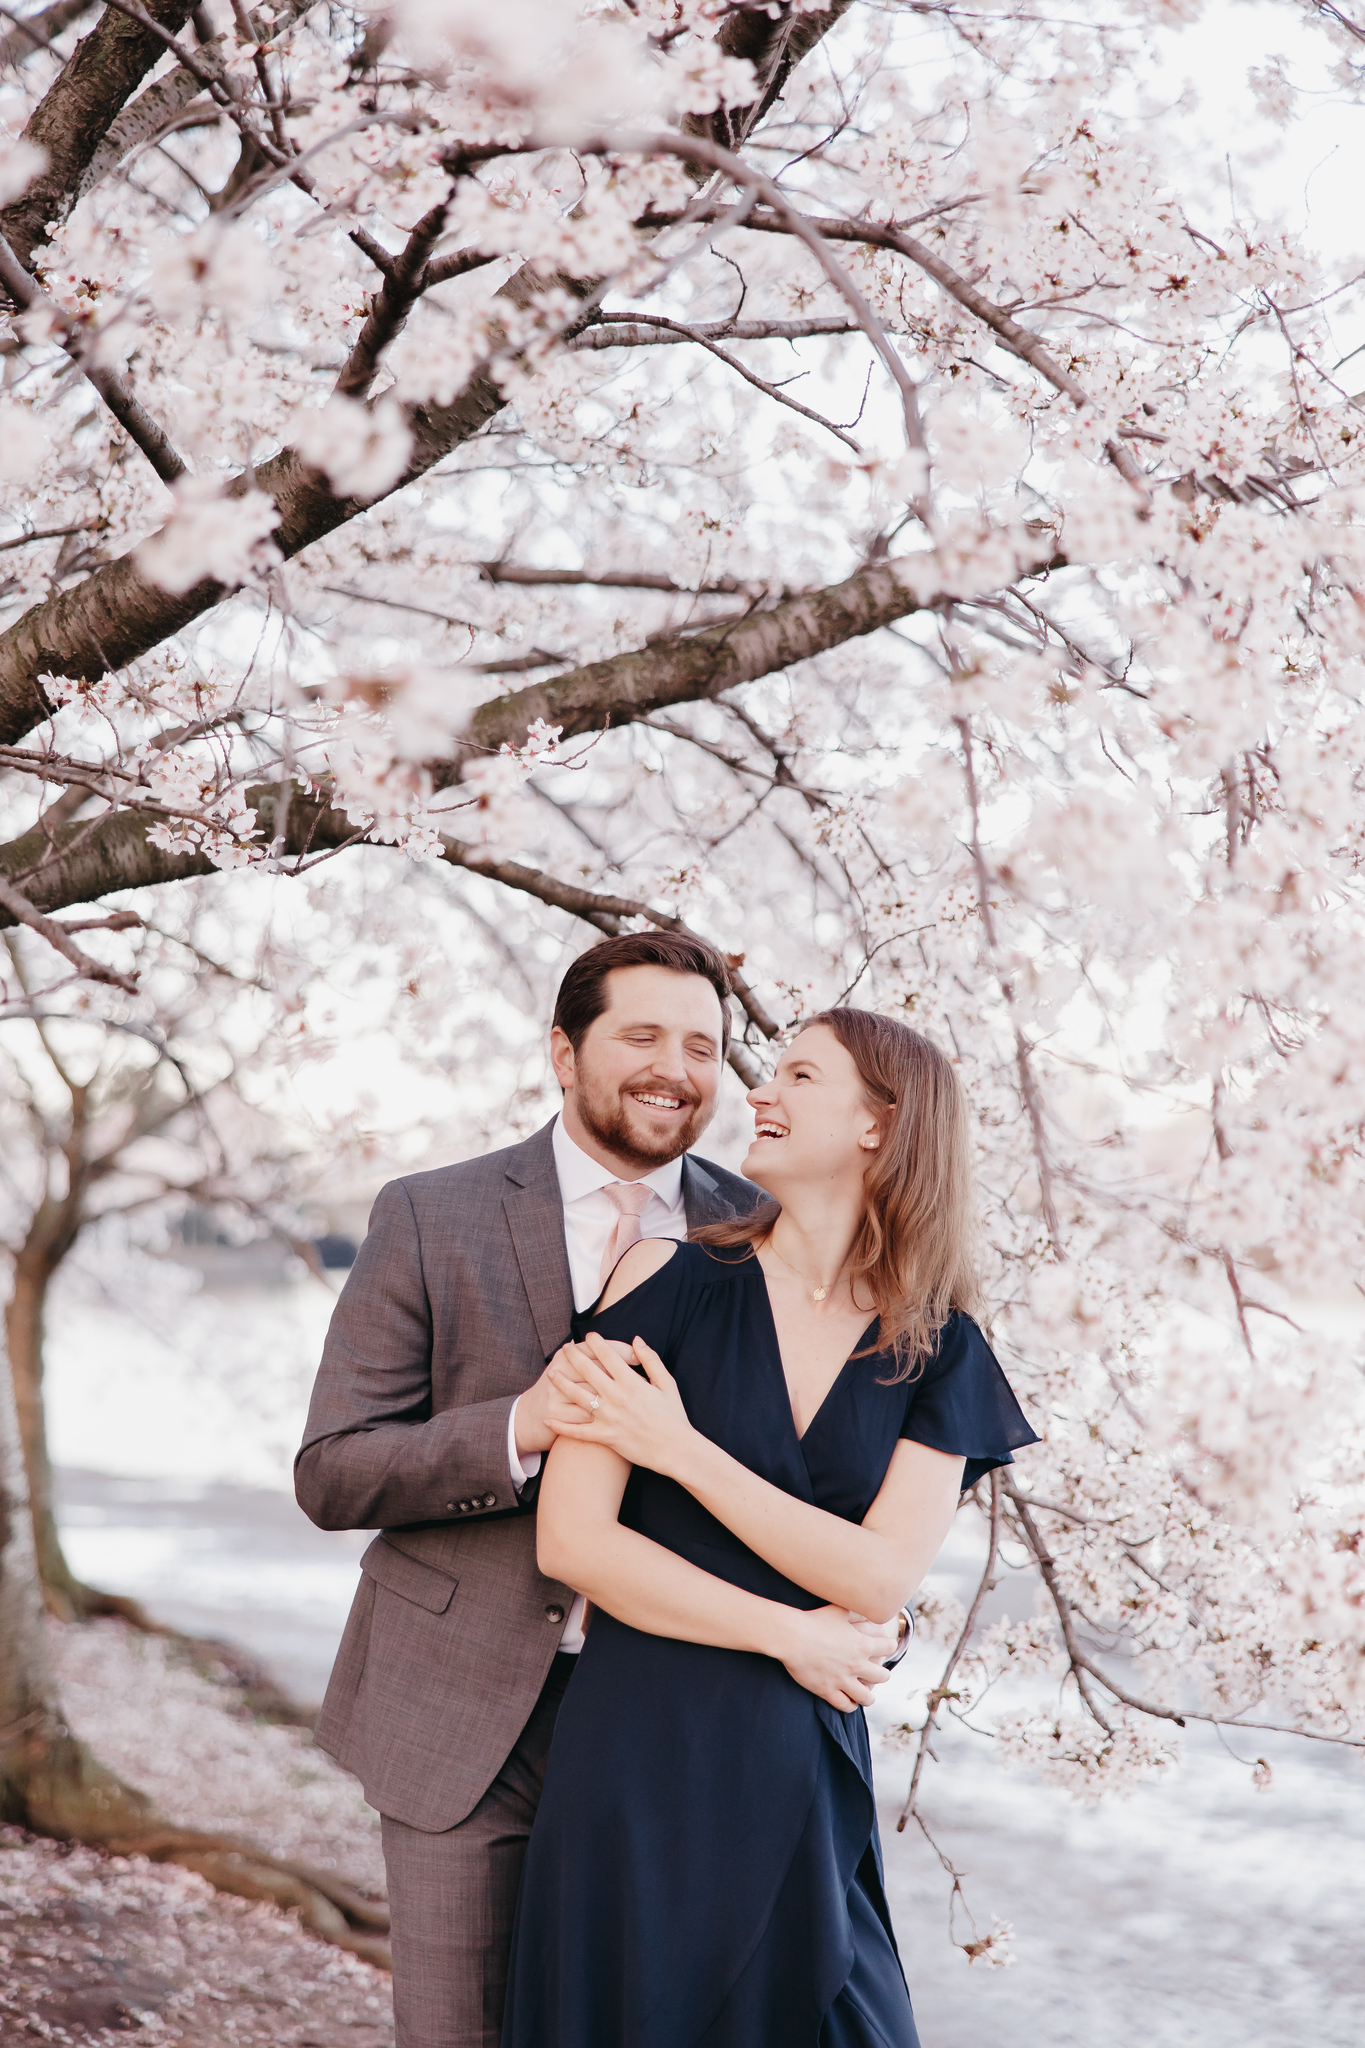 Engaged Couple in front of Cherry Blossoms in Washington, DC